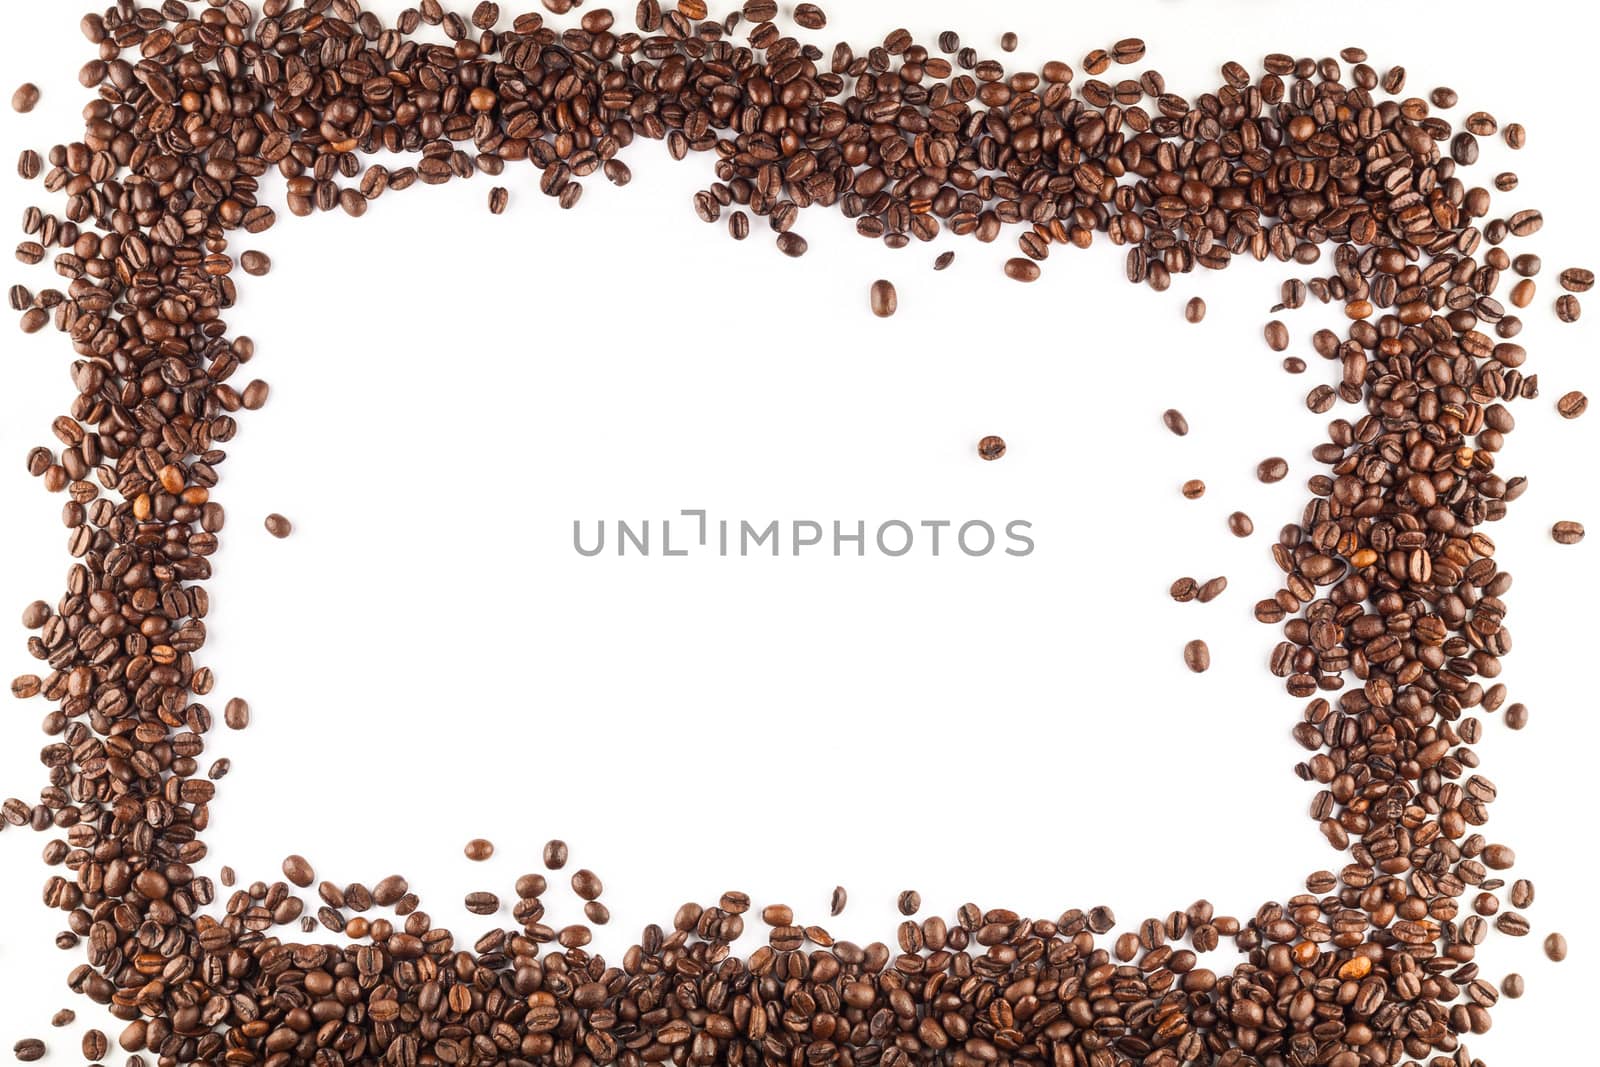 Scattered coffee beans arranged in a frame.